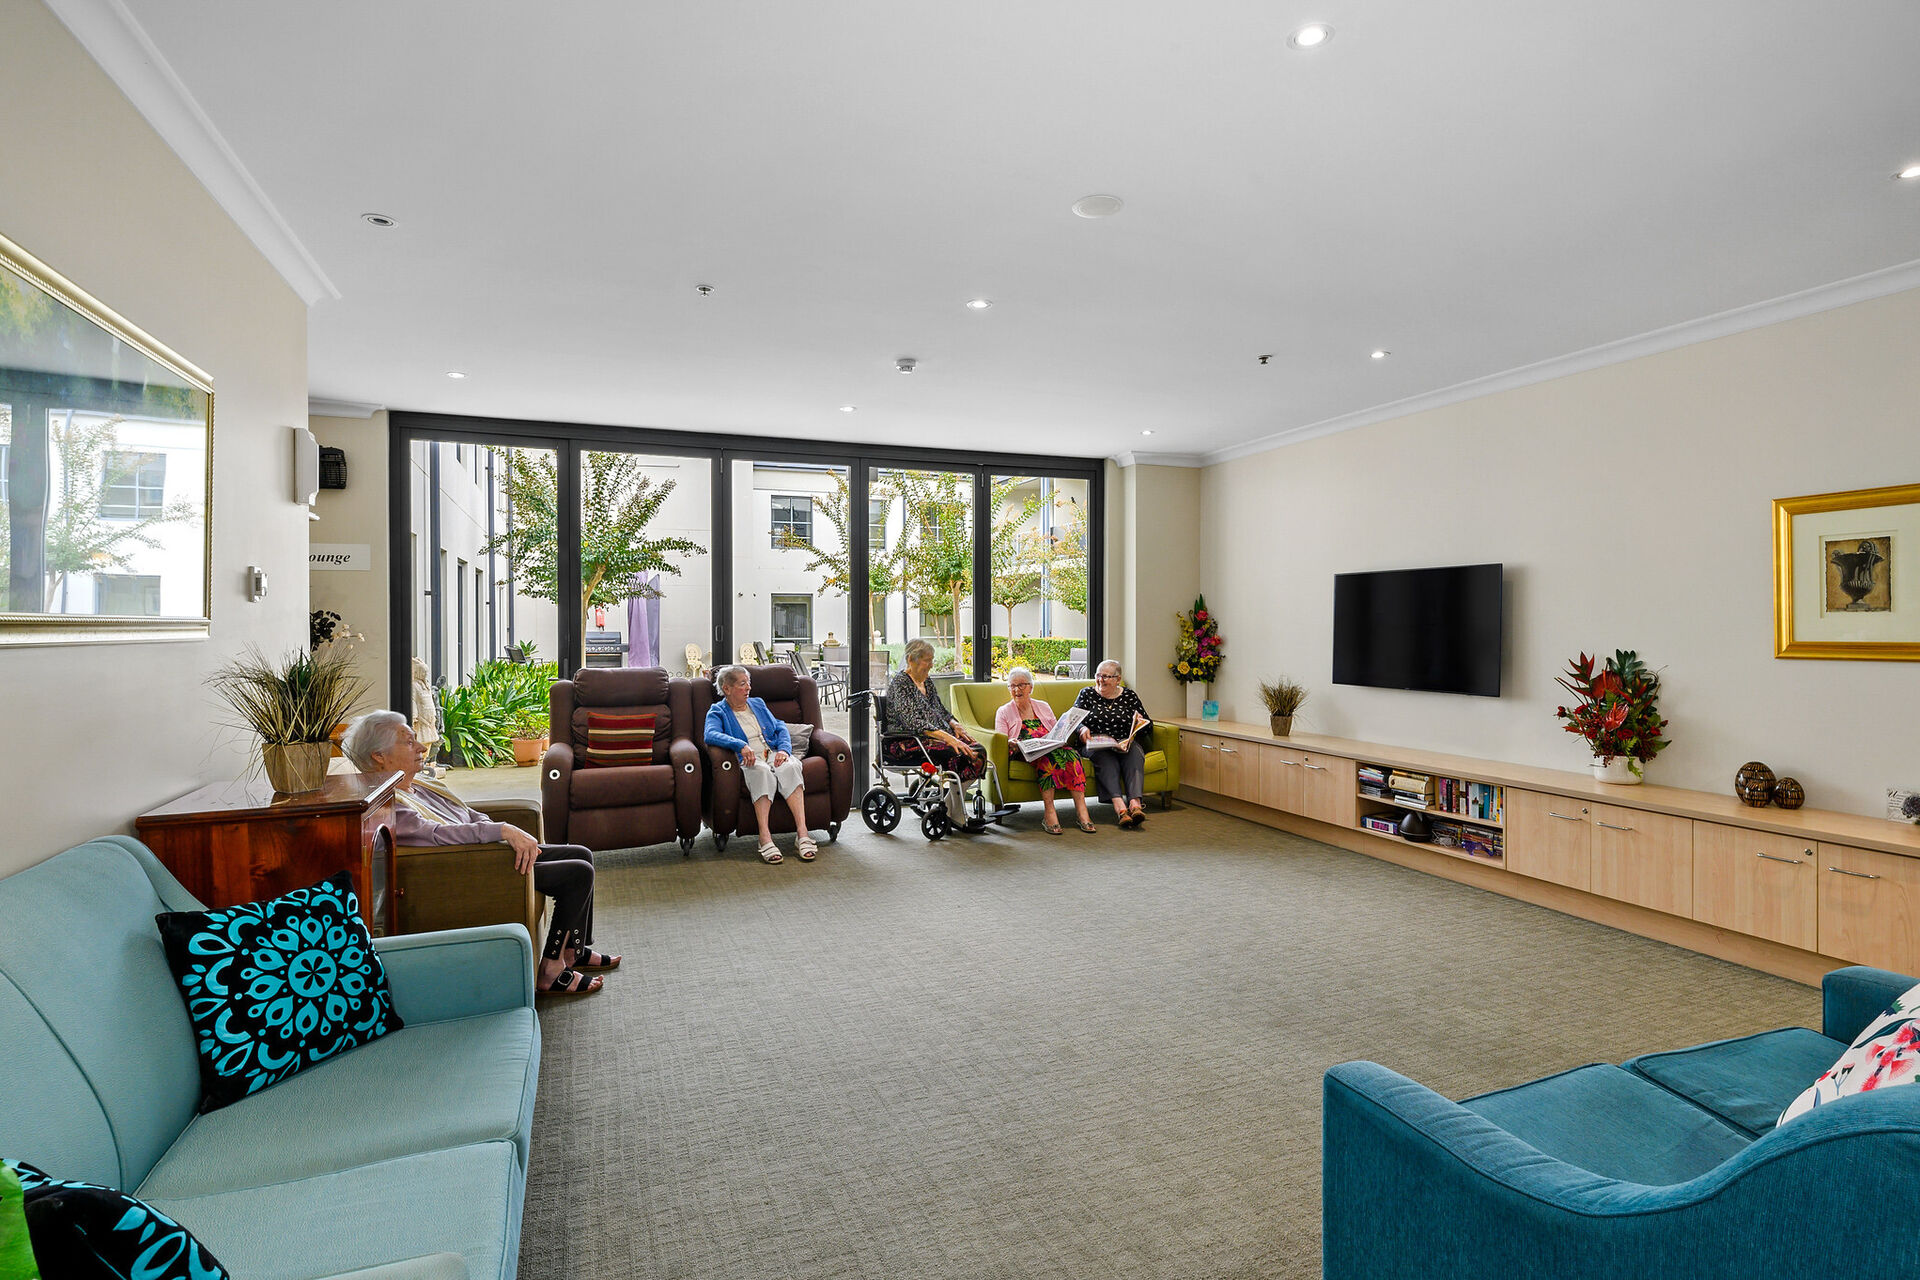 communal spacious lounge room for nursing home residents at baptistcare durham green centre aged care home in menangle nsw